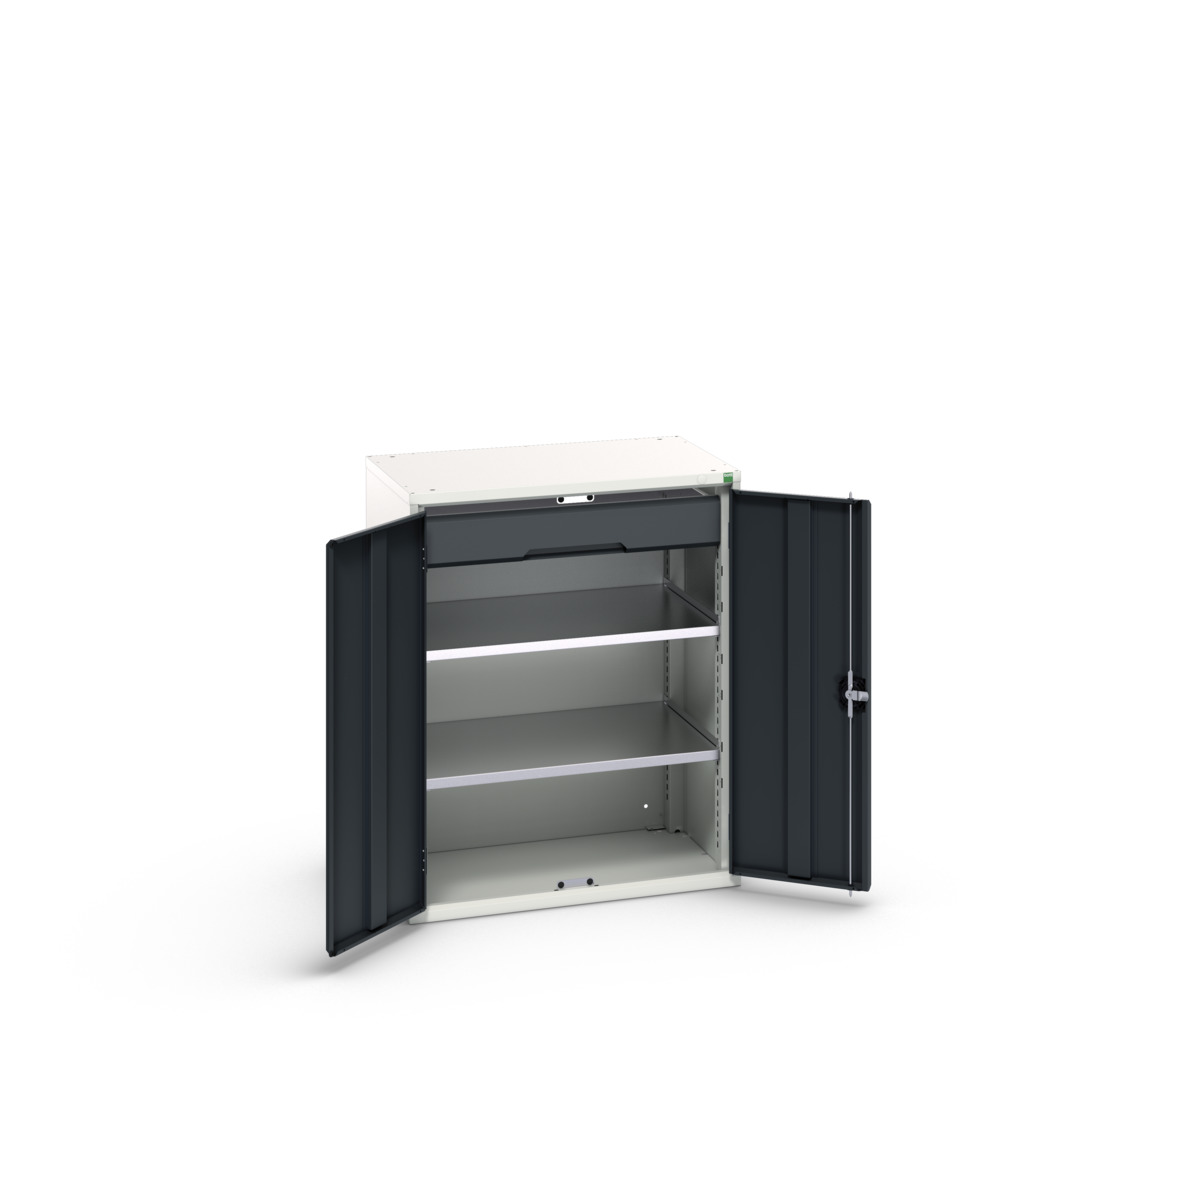 16926452. - verso kitted cupboard